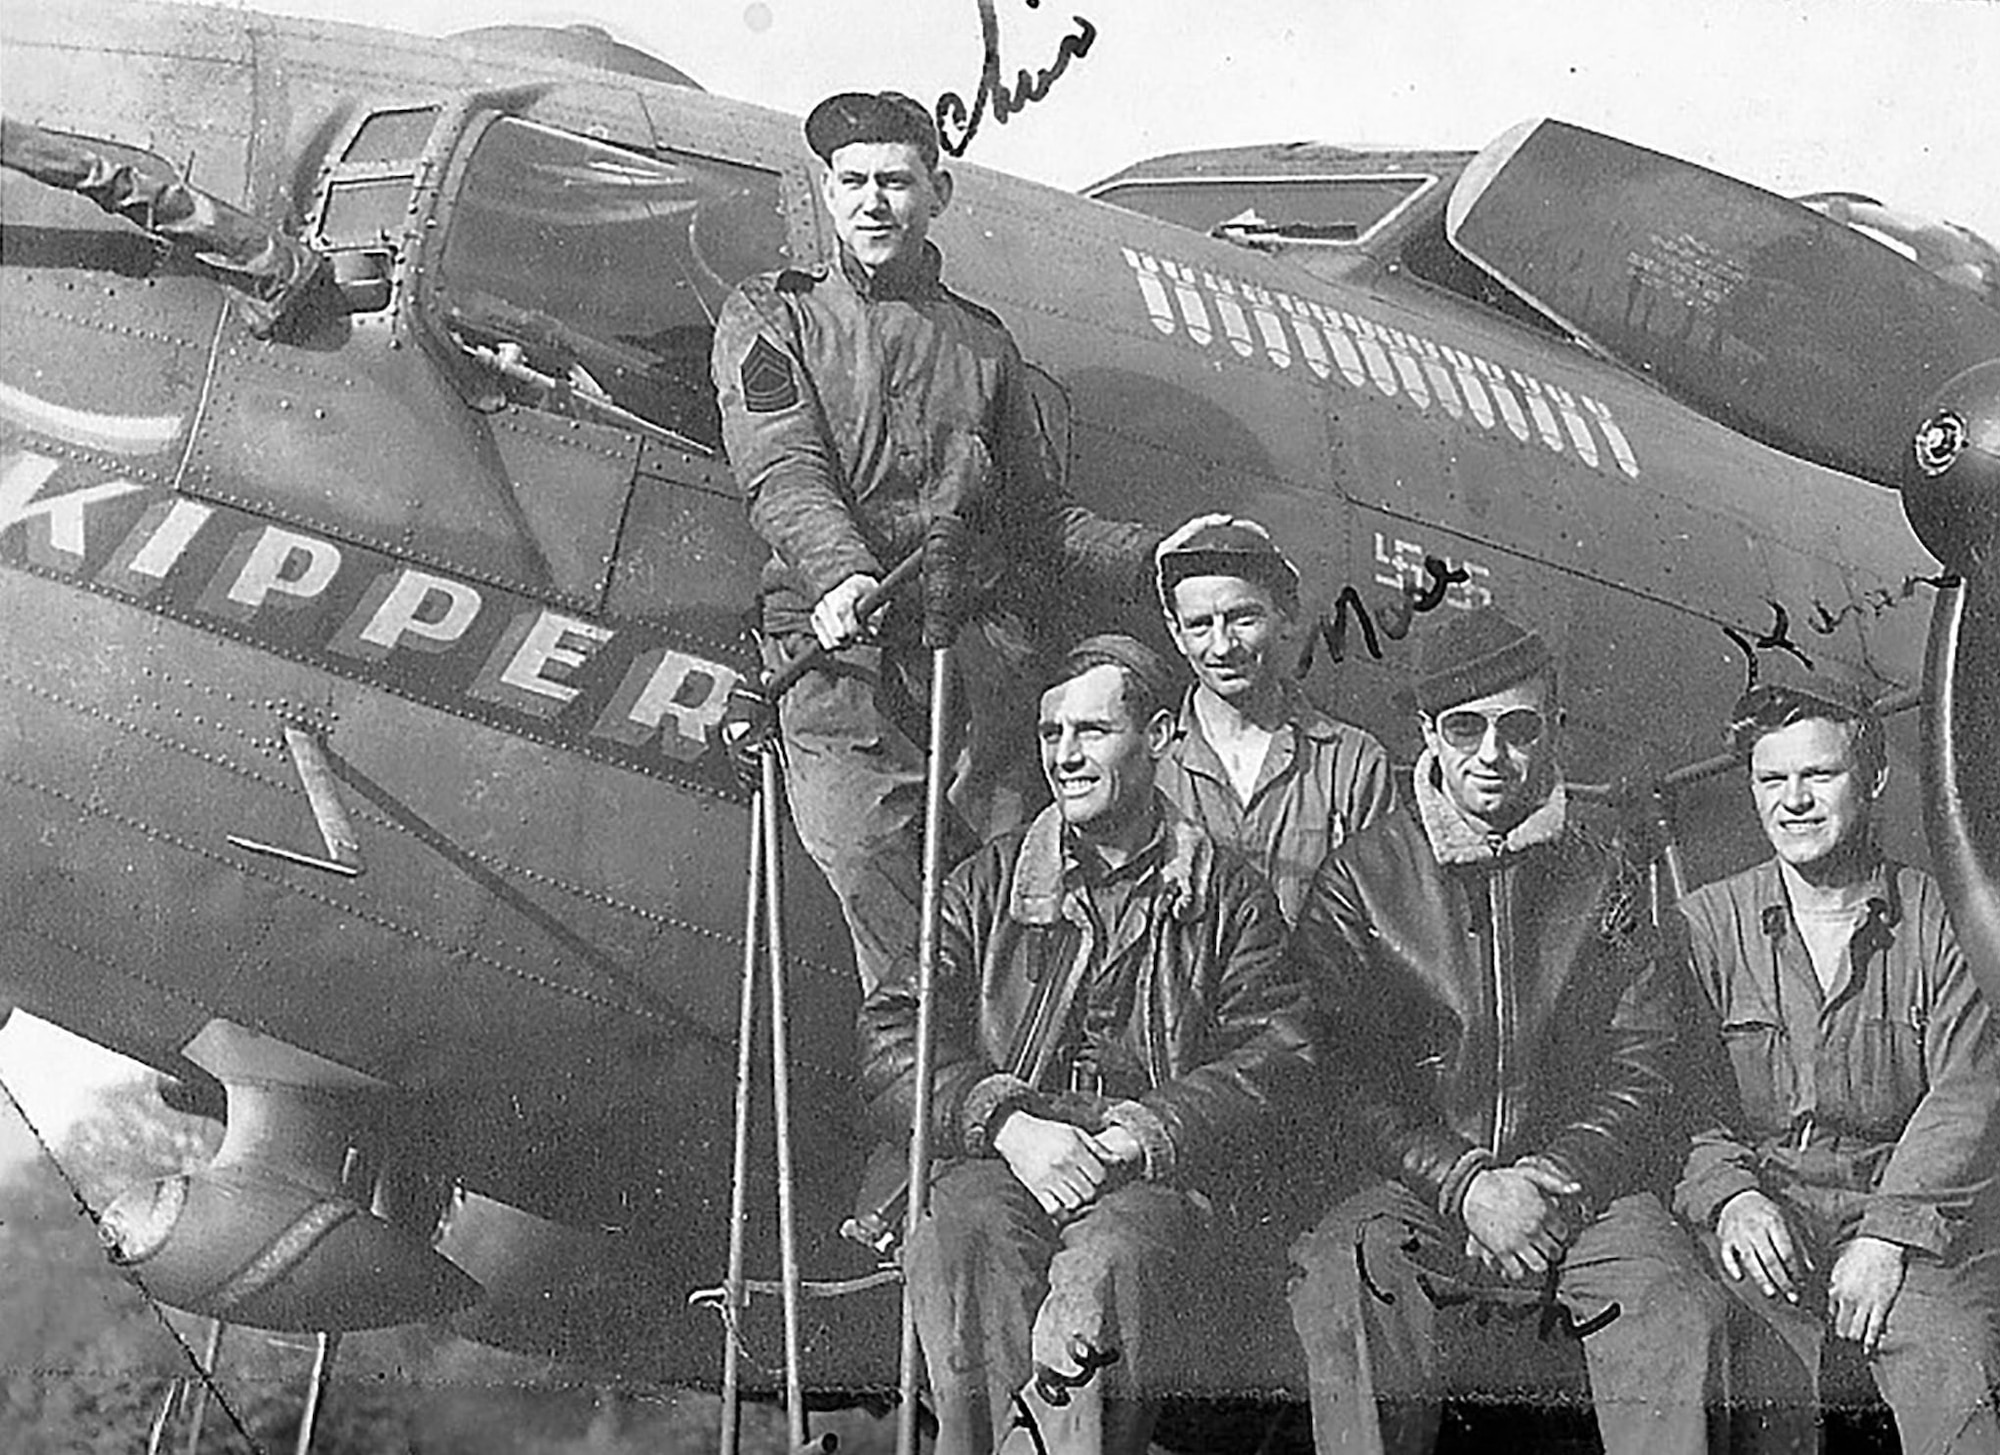 U.S. Army Air Corps Master Sgt. Dewey Christopher, left, poses for a photo with his ground crew and first B-17 Flying Fortress aircraft, “Skipper” at Thorpe Abbotts, Diss, England, in 1942. Christopher was a crew chief and maintainer with the 100th Bombardment Group and 351st Bomb Squadron during World War II. Royal Air Force Mildenhall dedicated the nose art of one of its KC-135 Stratotanker aircraft in his honor when “Skipper III” was unveiled May 7, 2021. (Courtesy photo)